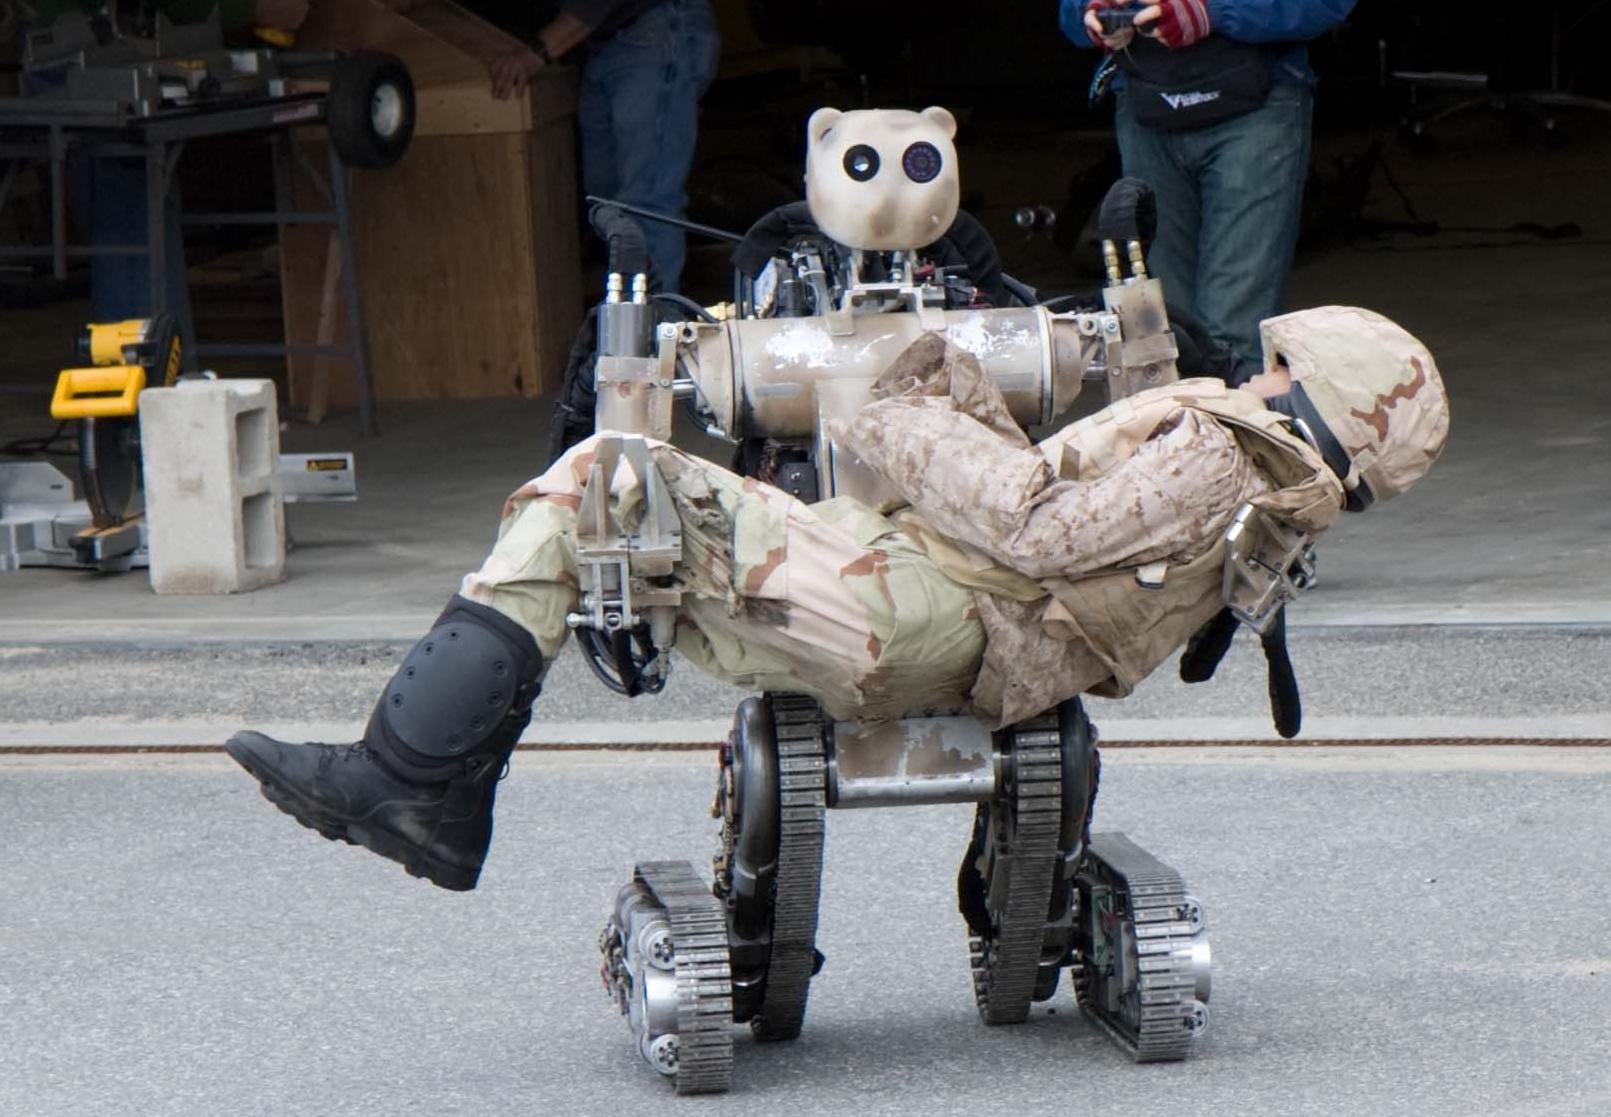 Robots to rescue wounded on battlefield | | The States Army